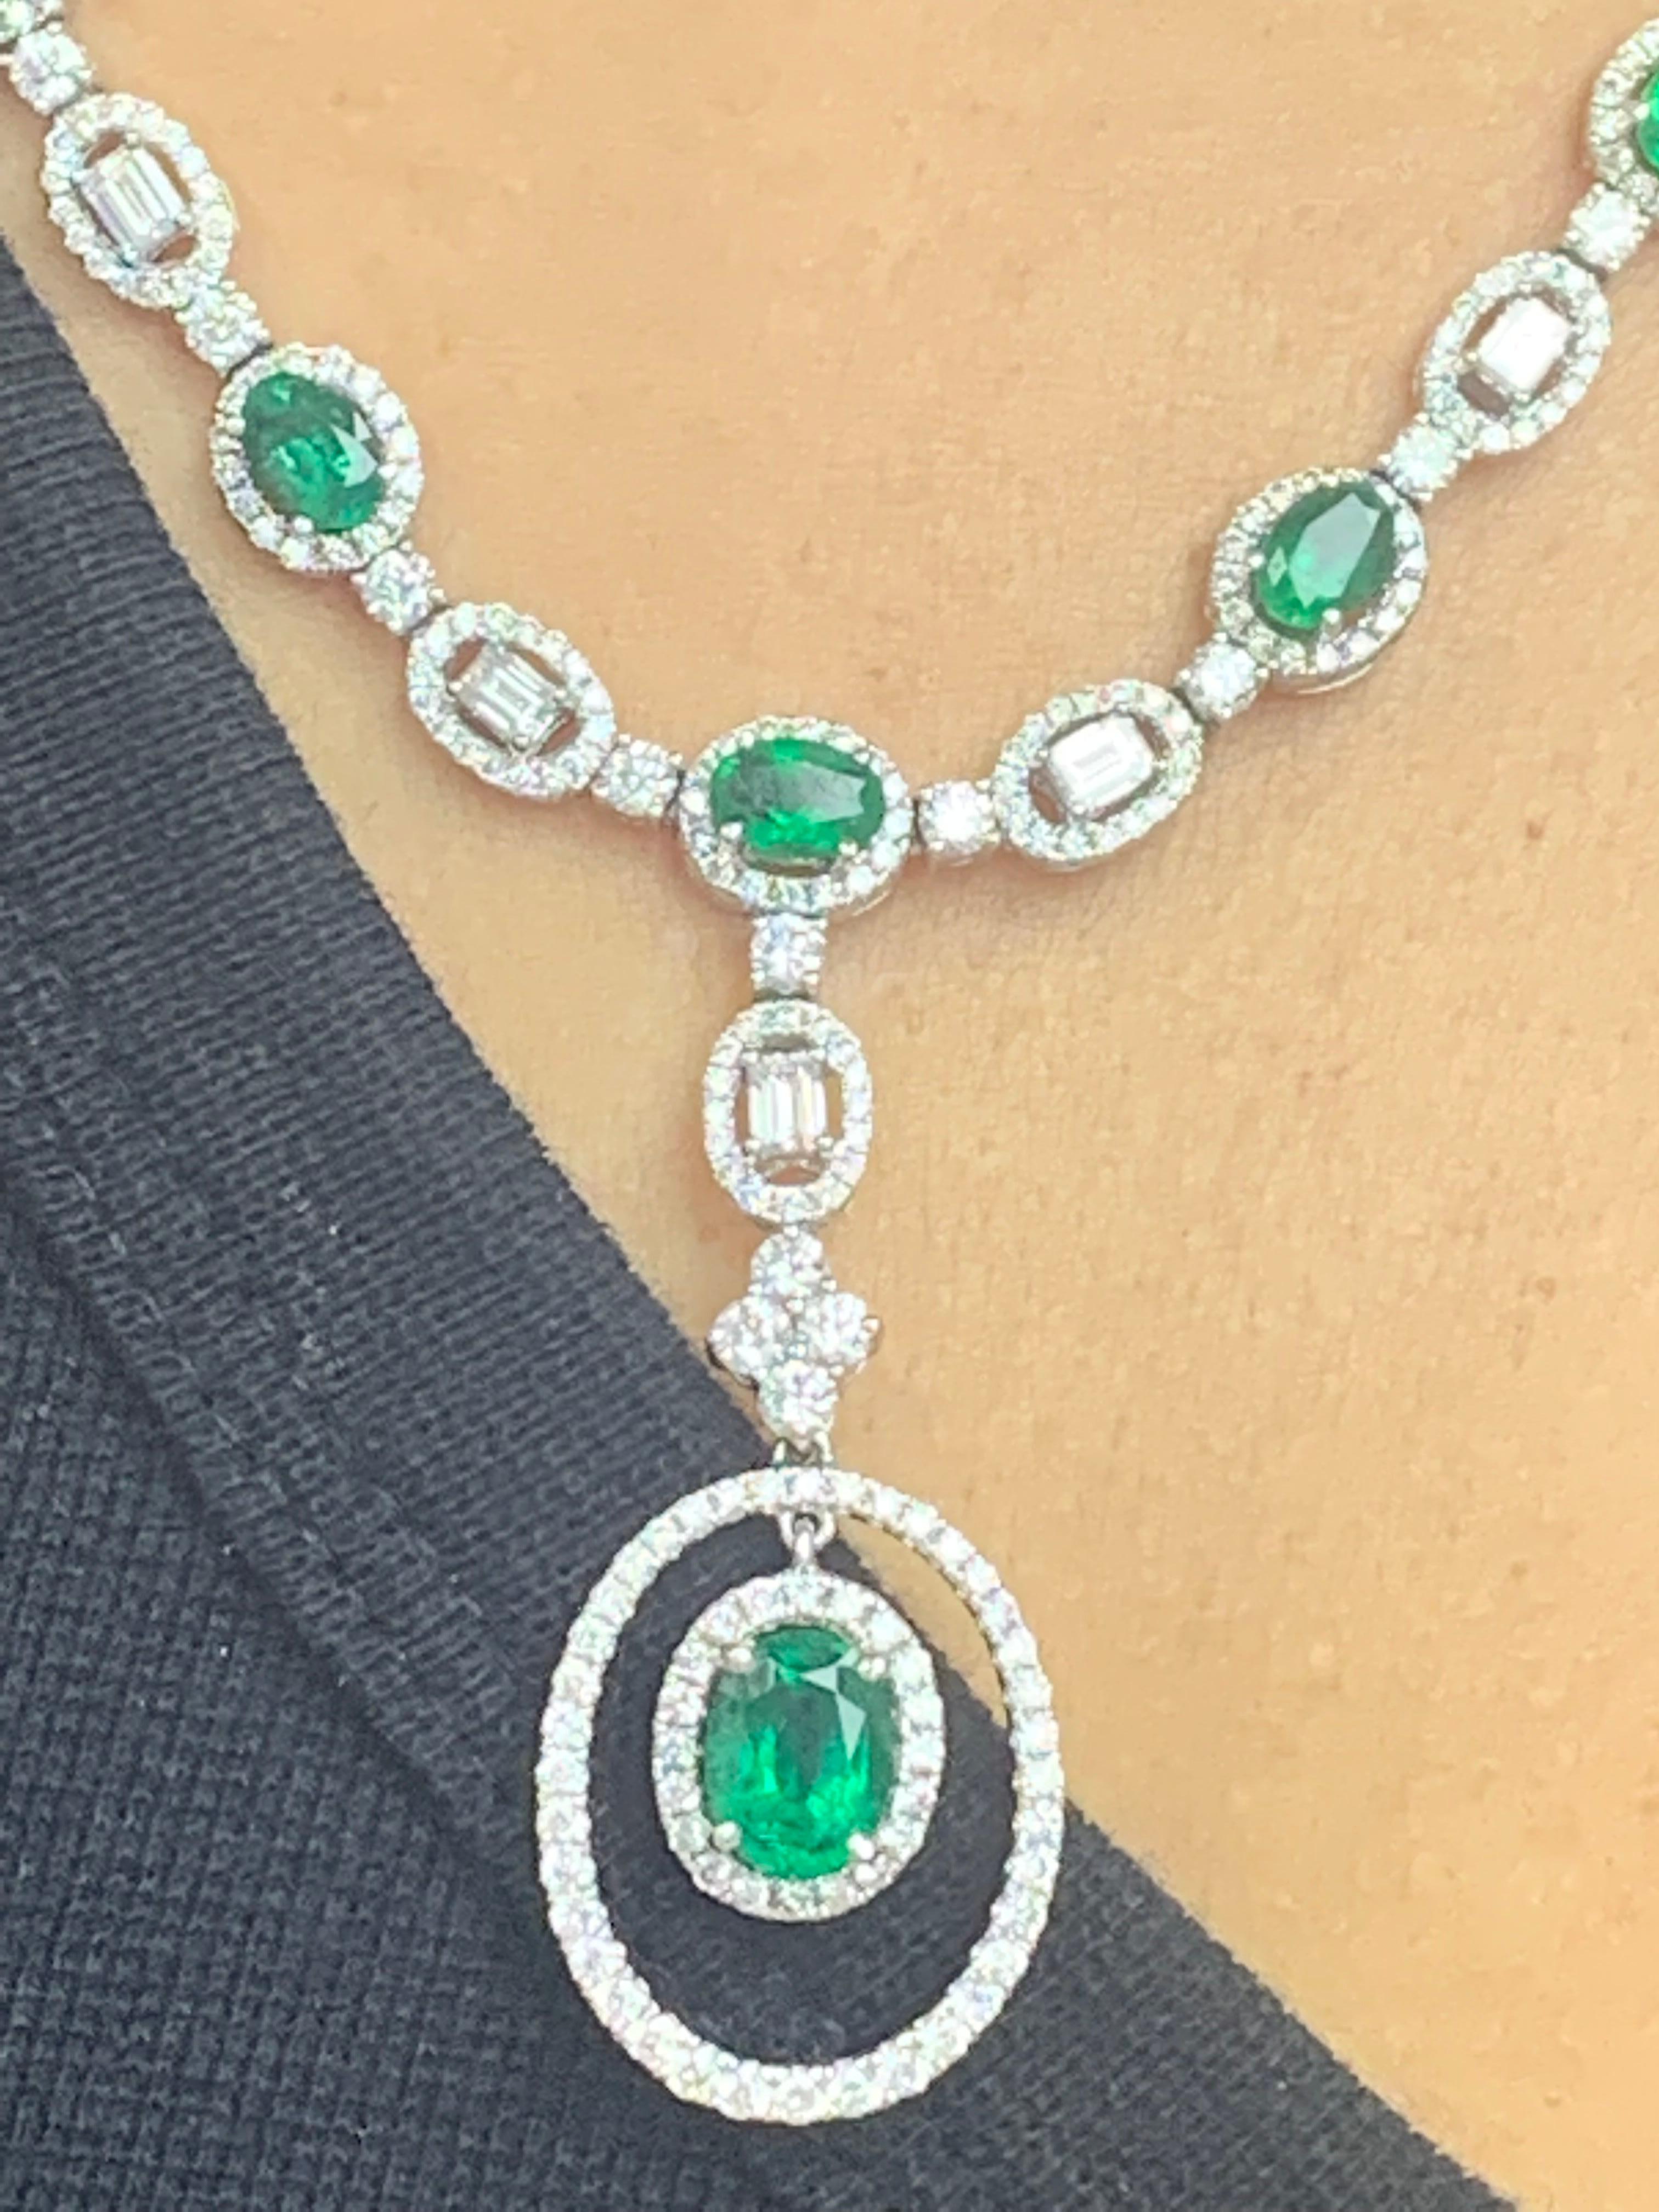 4.21 Carat Oval Cut Emerald and Diamond Necklace in 18 White Gold For Sale 1